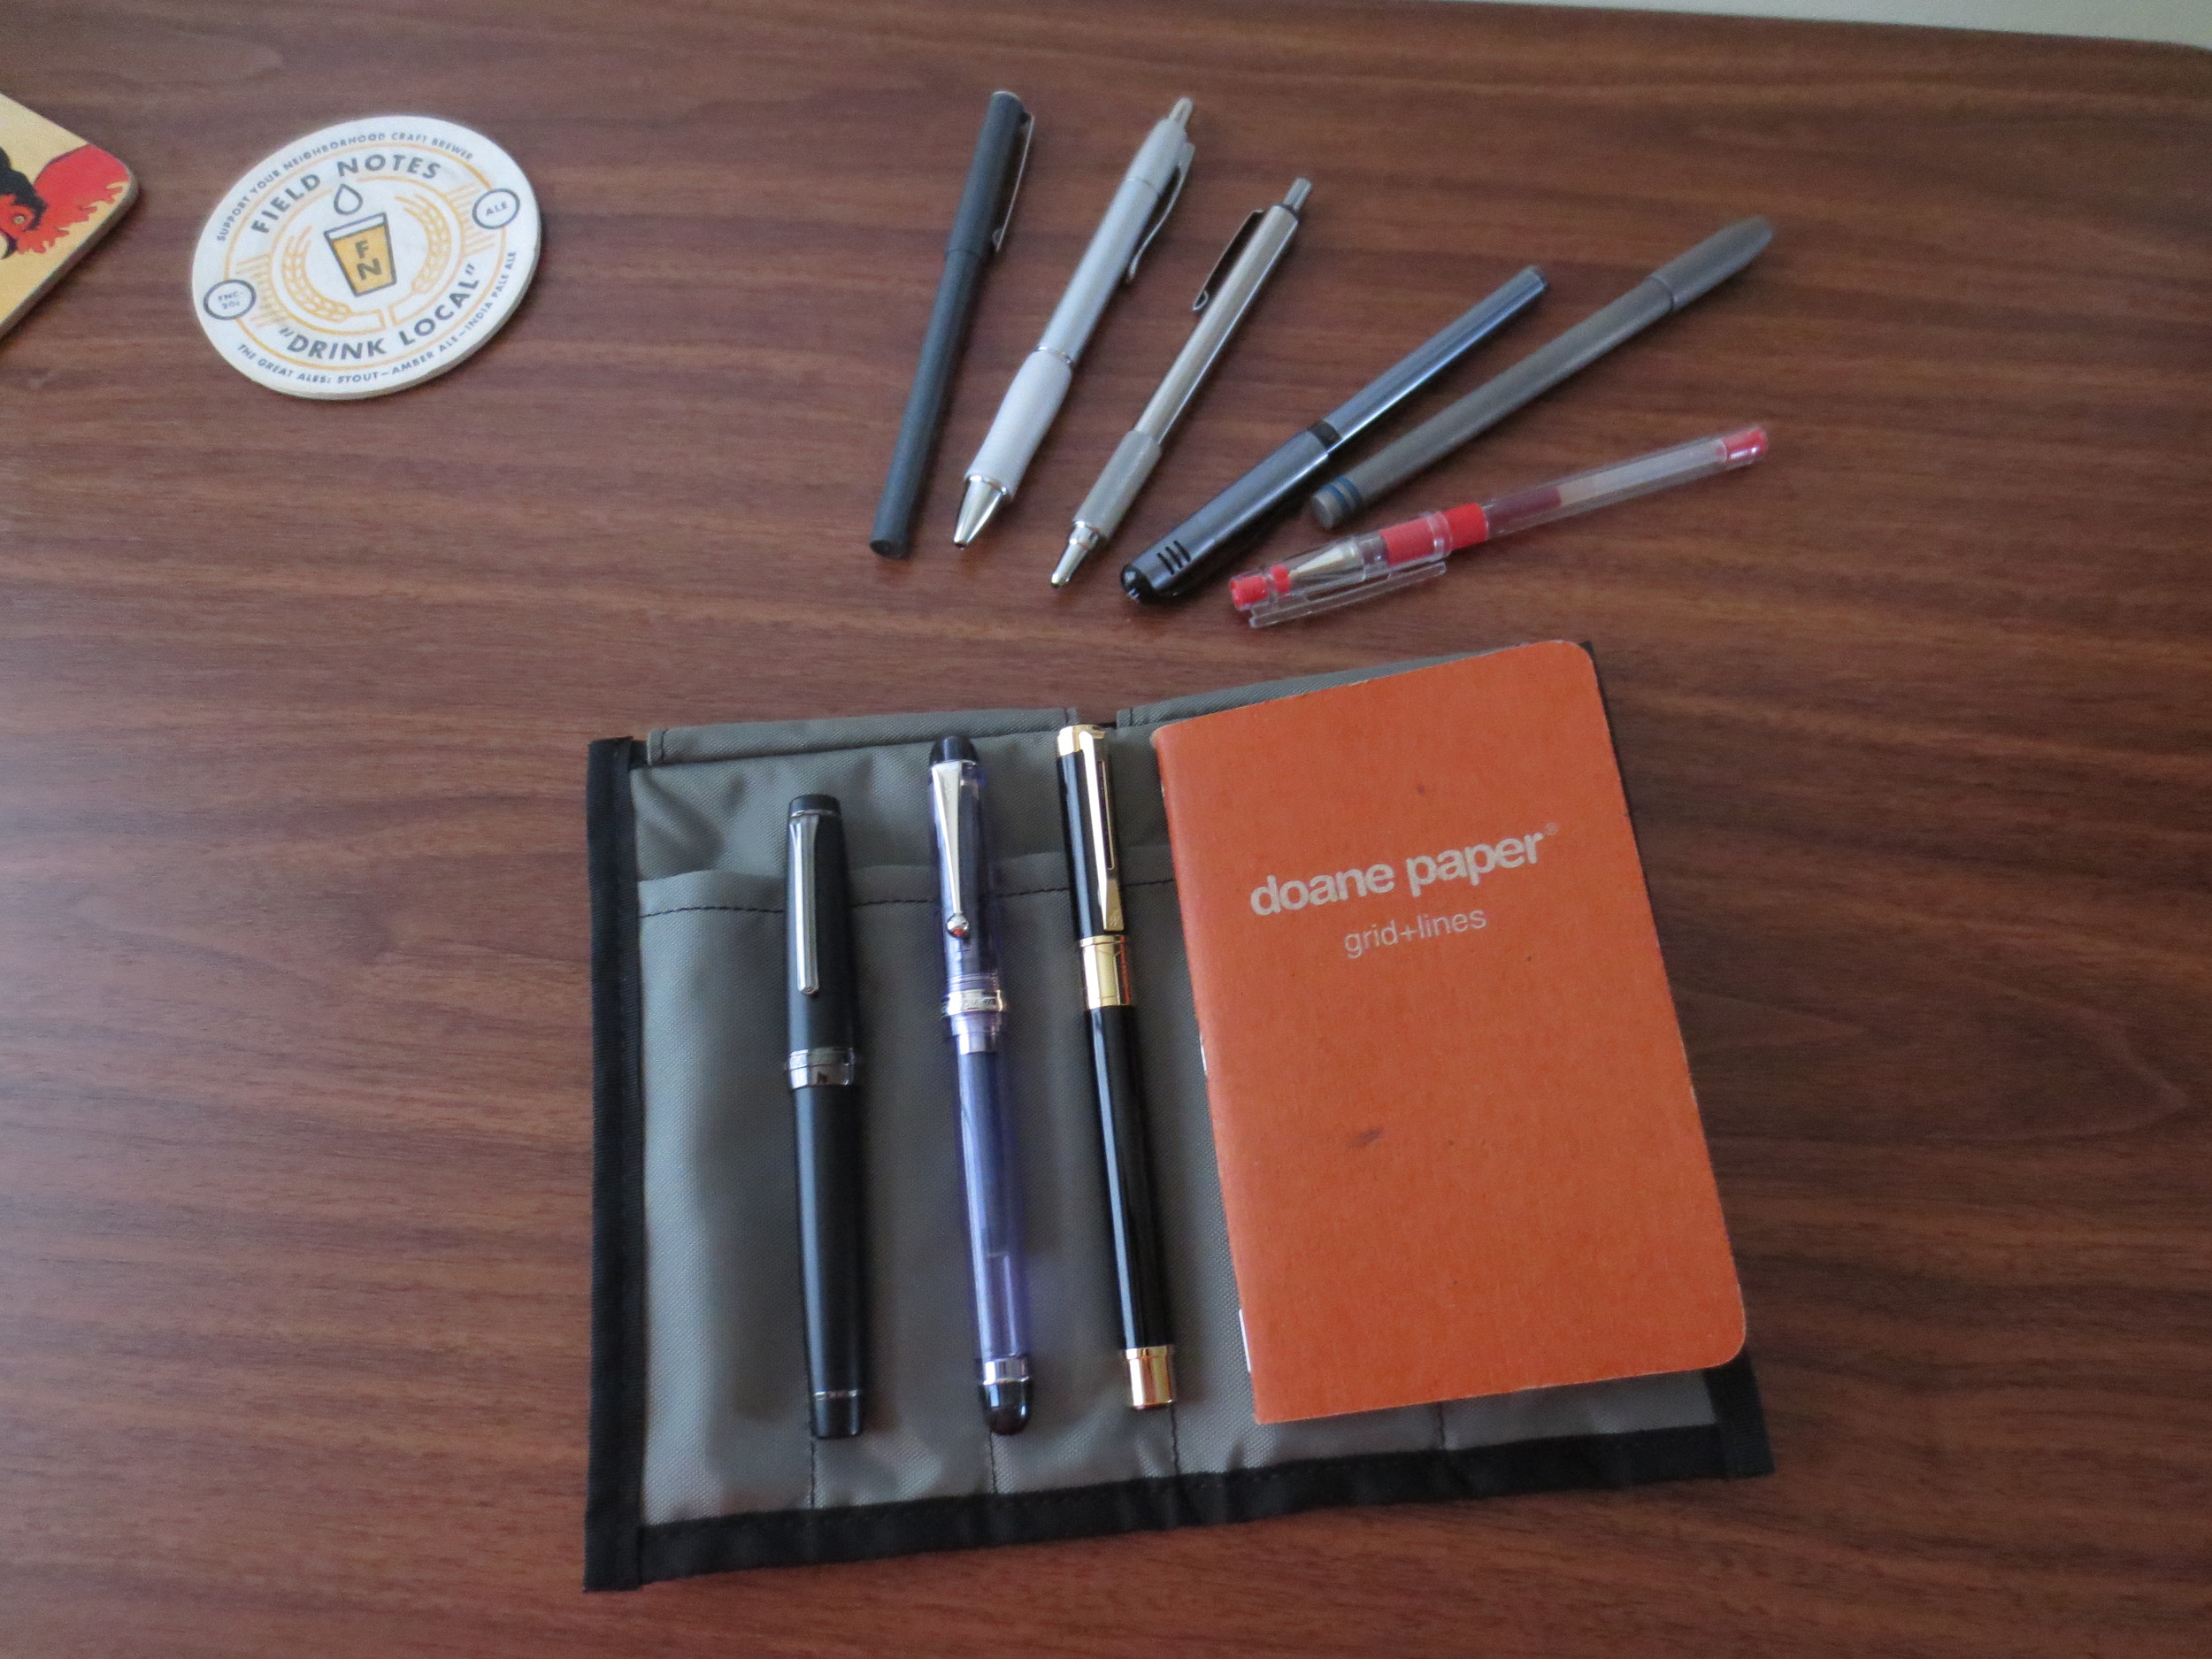 Top 5 Pen Storage Solutions: Pen Boxes and Folios — The Gentleman Stationer